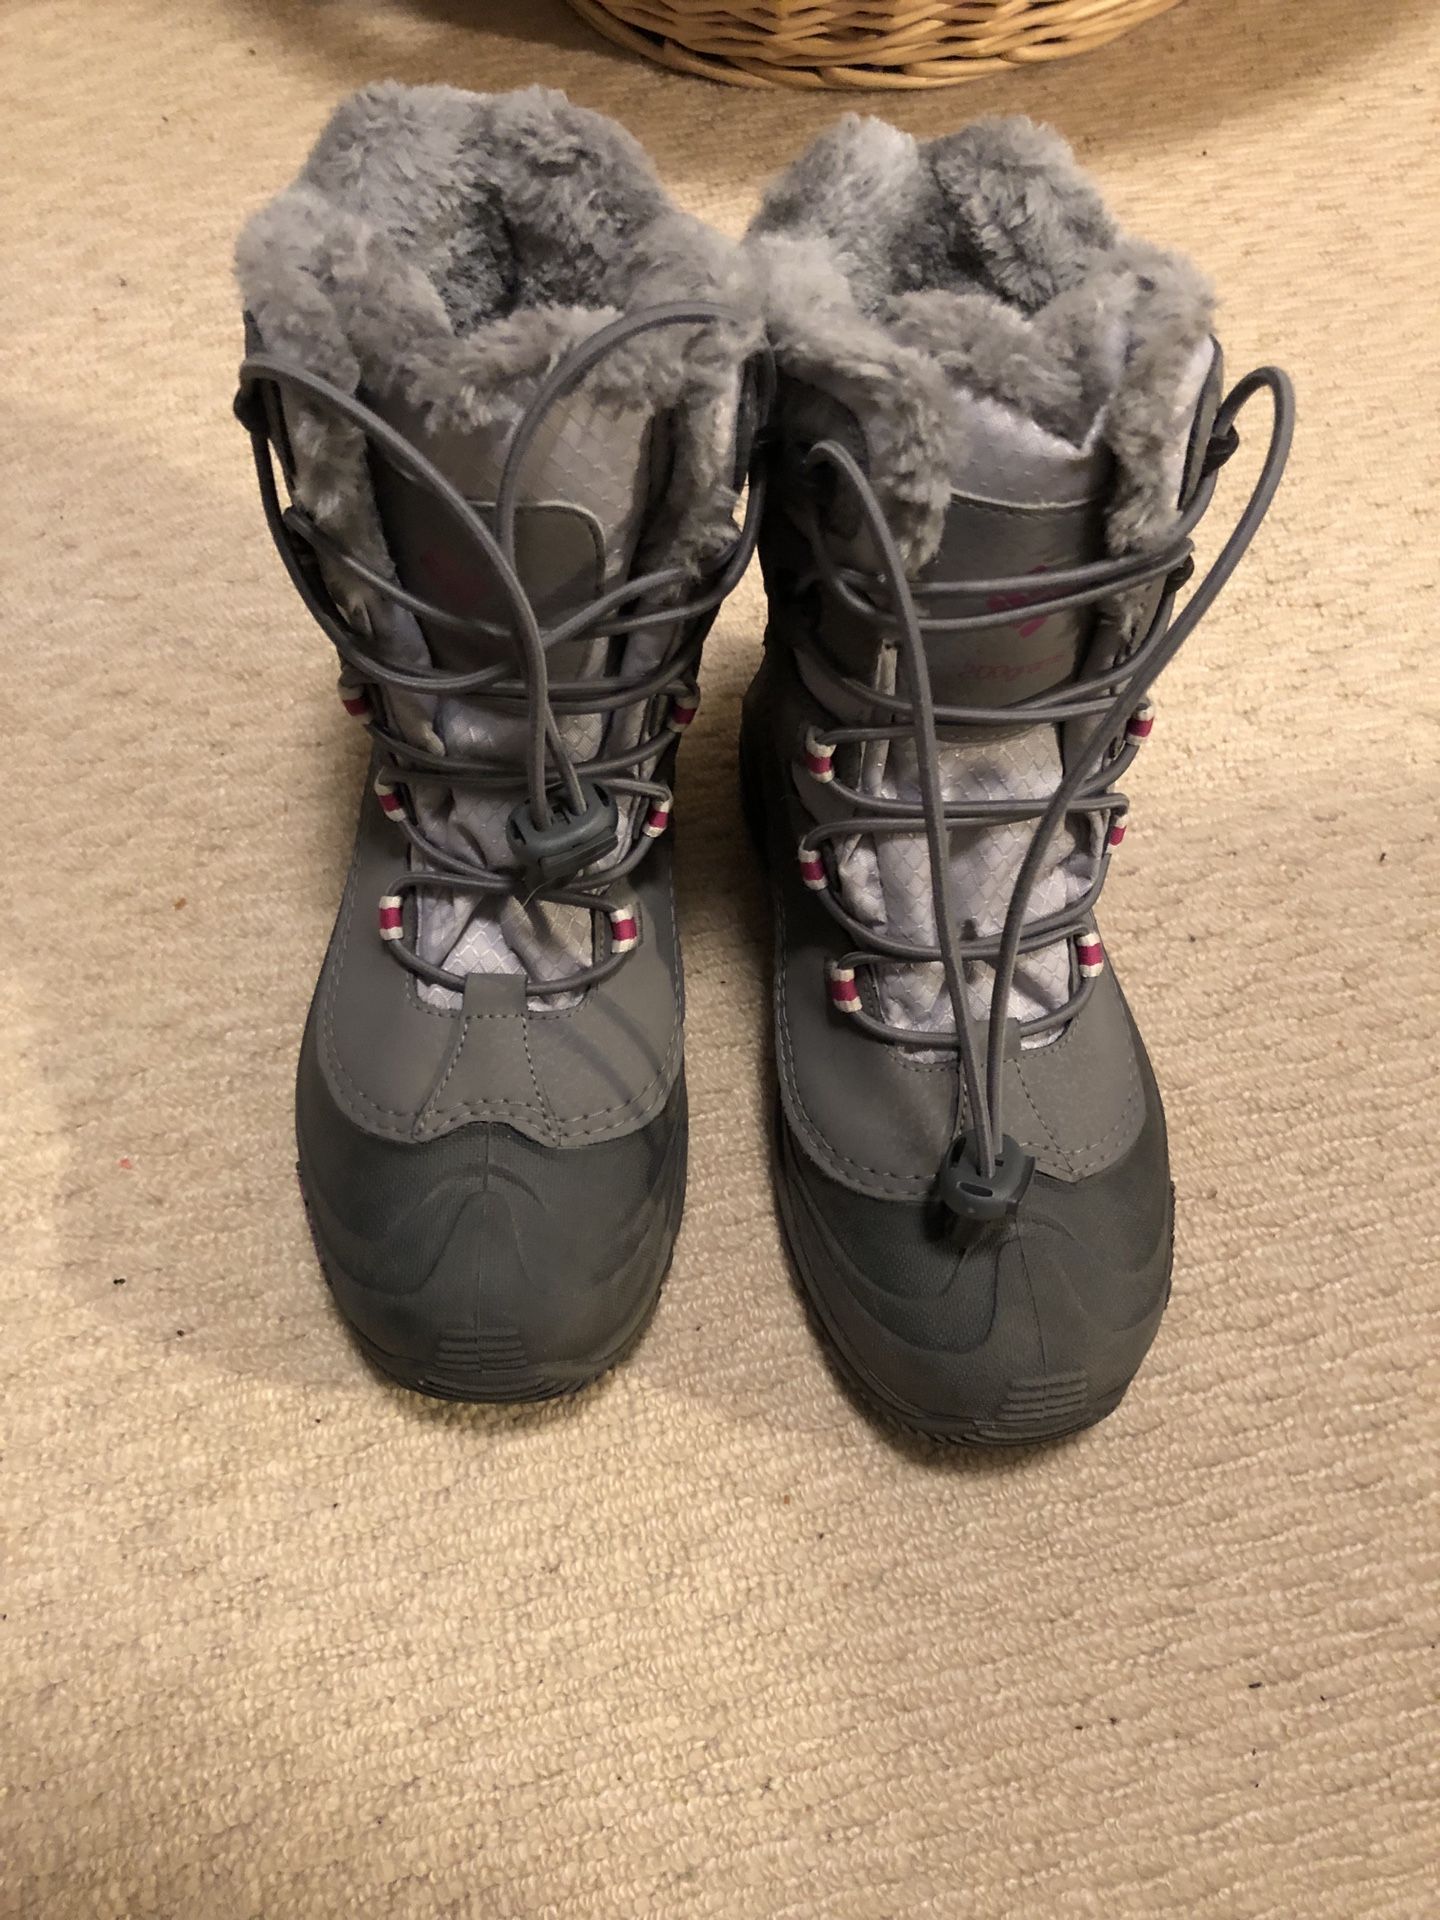 Price reduced to only $39! Columbia winter / snow boots Omni heat 200 grams Women’s size 5 - ONLY worn twice!